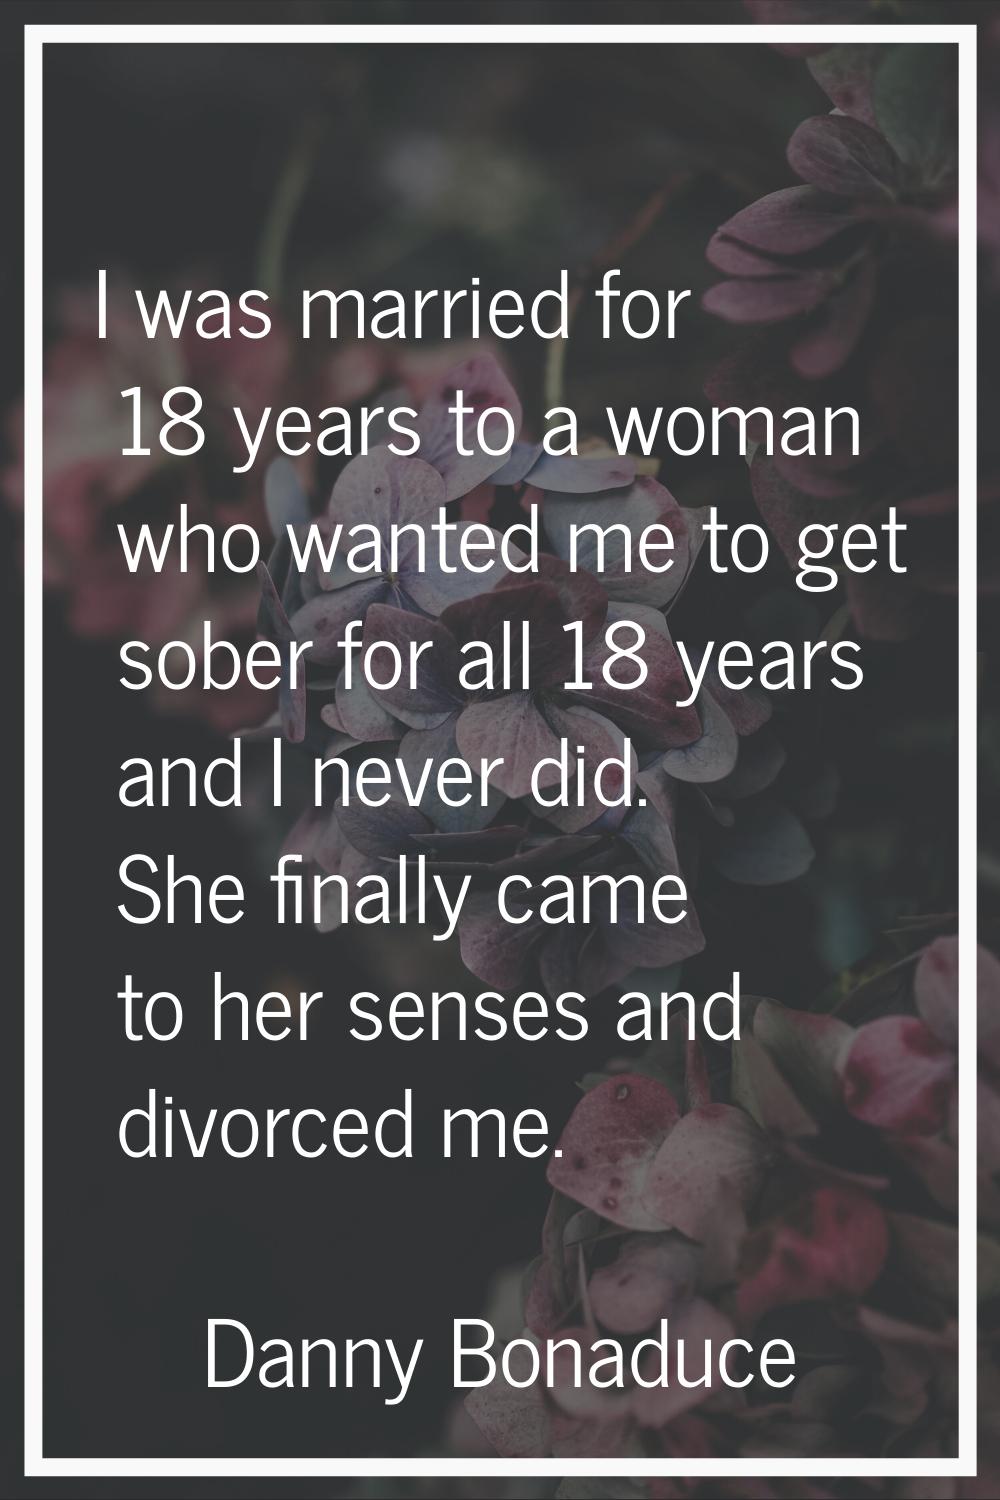 I was married for 18 years to a woman who wanted me to get sober for all 18 years and I never did. 